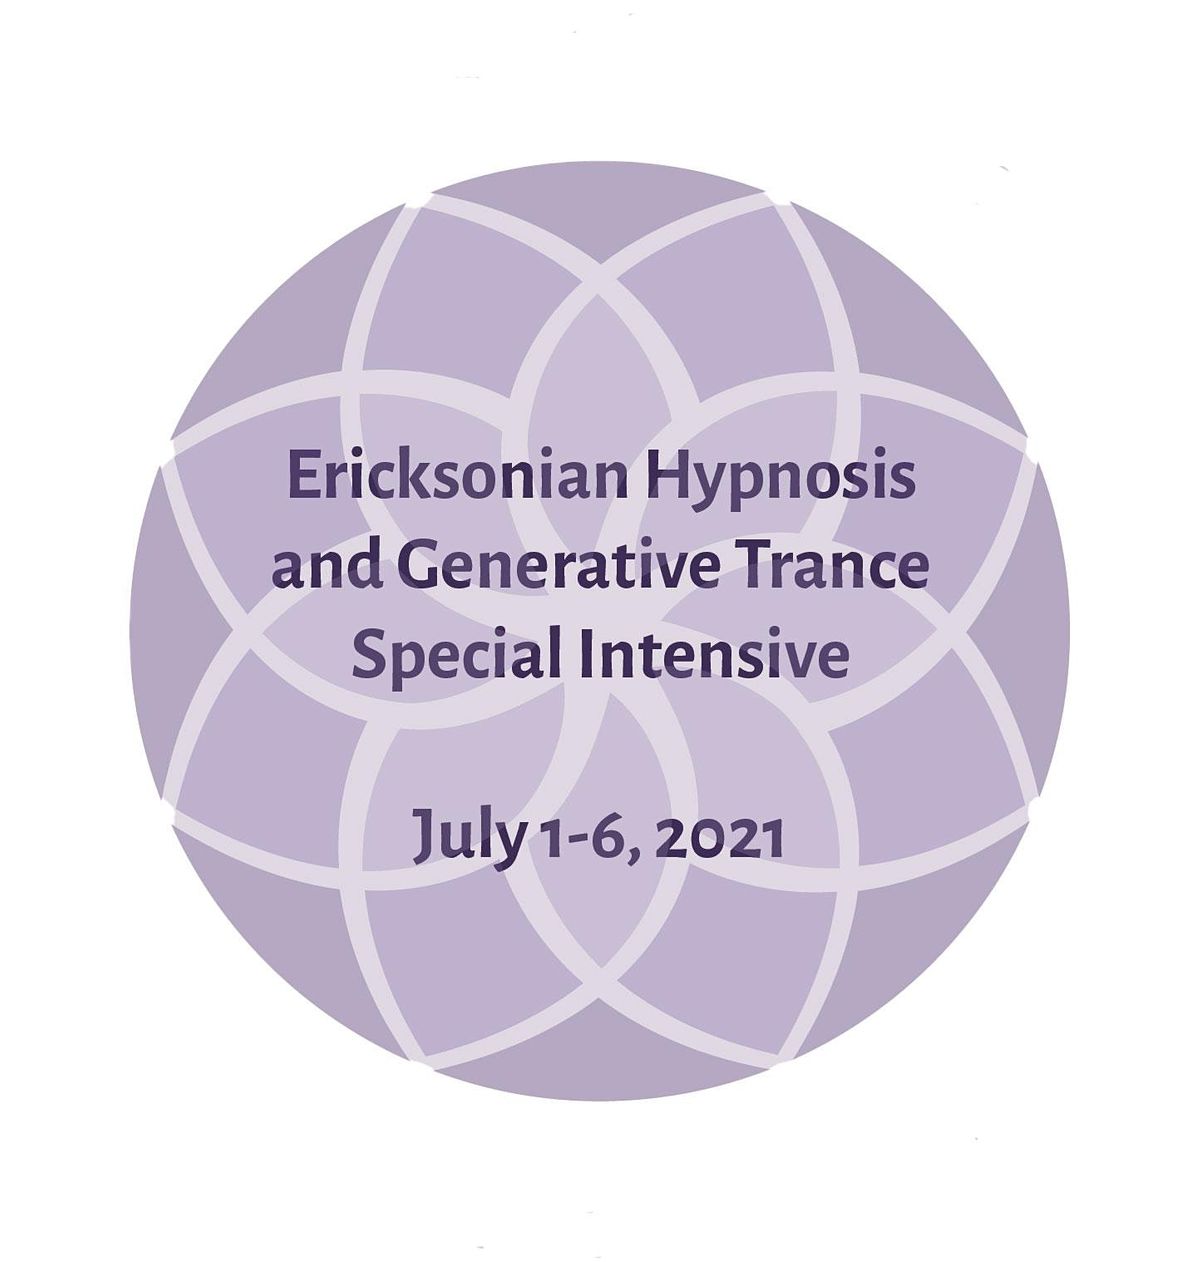 Special Intensive Workshop on Ericksonian Hypnosis and Generative Trance